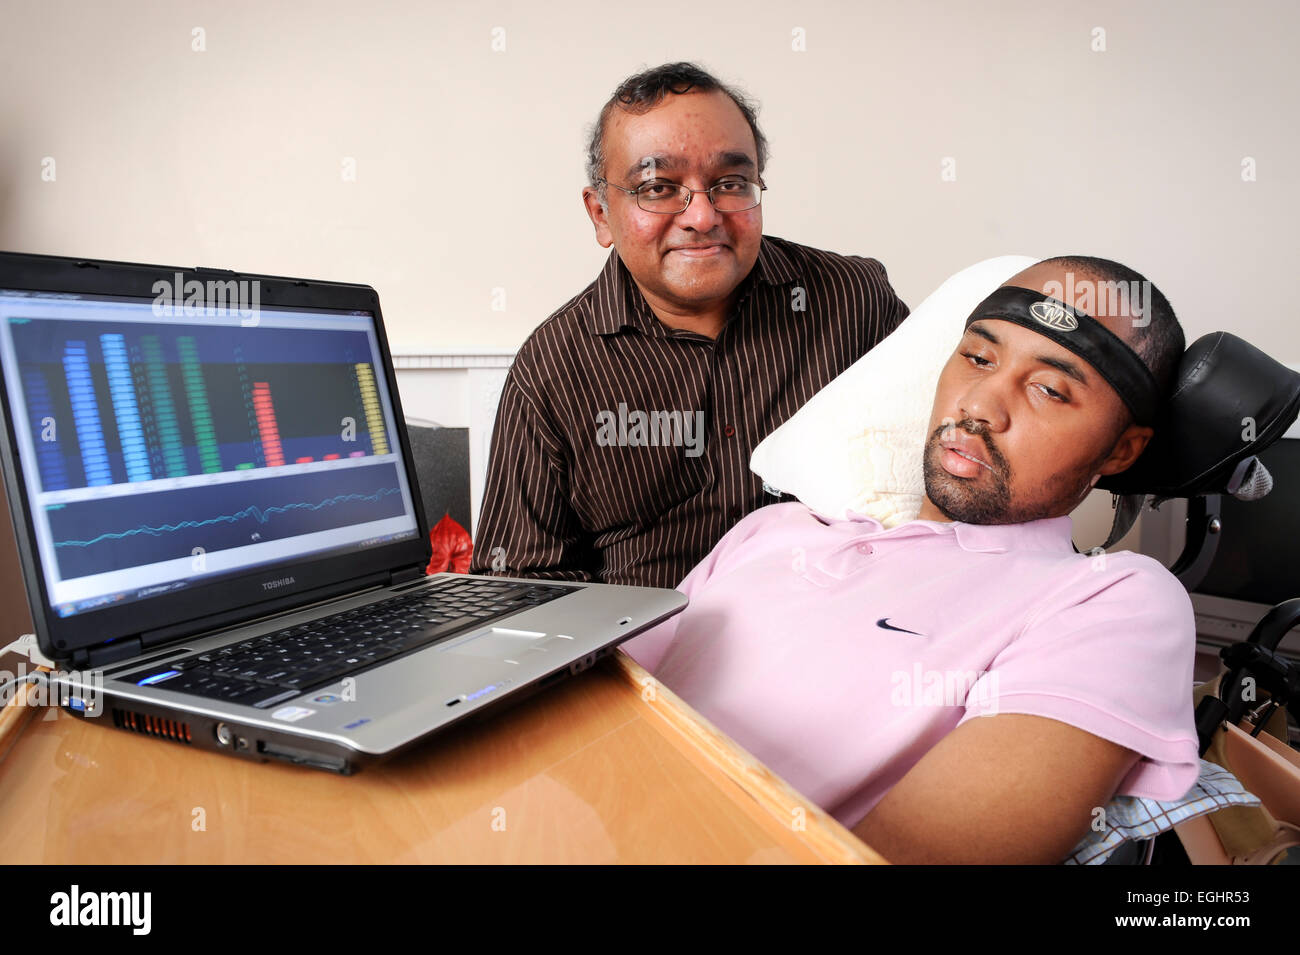 Richard Gregory has Locked-in Syndrome is pictured with Dr Gnanayathum, who's developed a device which interprets the brainwaves Stock Photo